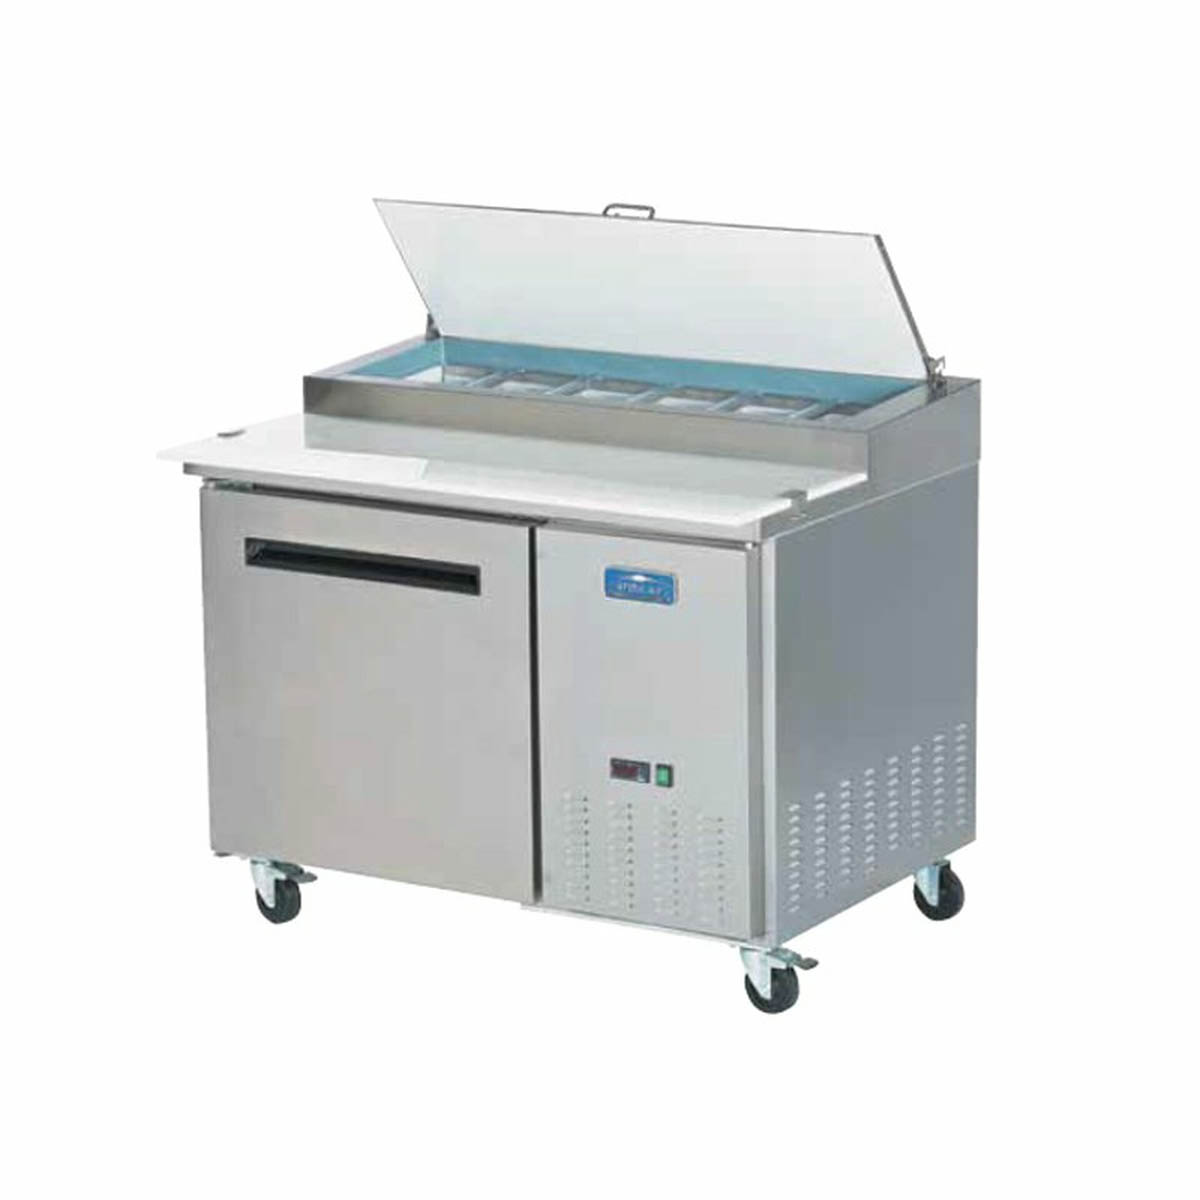 Valpro VPP44 47" Pizza Prep Table Refrigerated Counter 